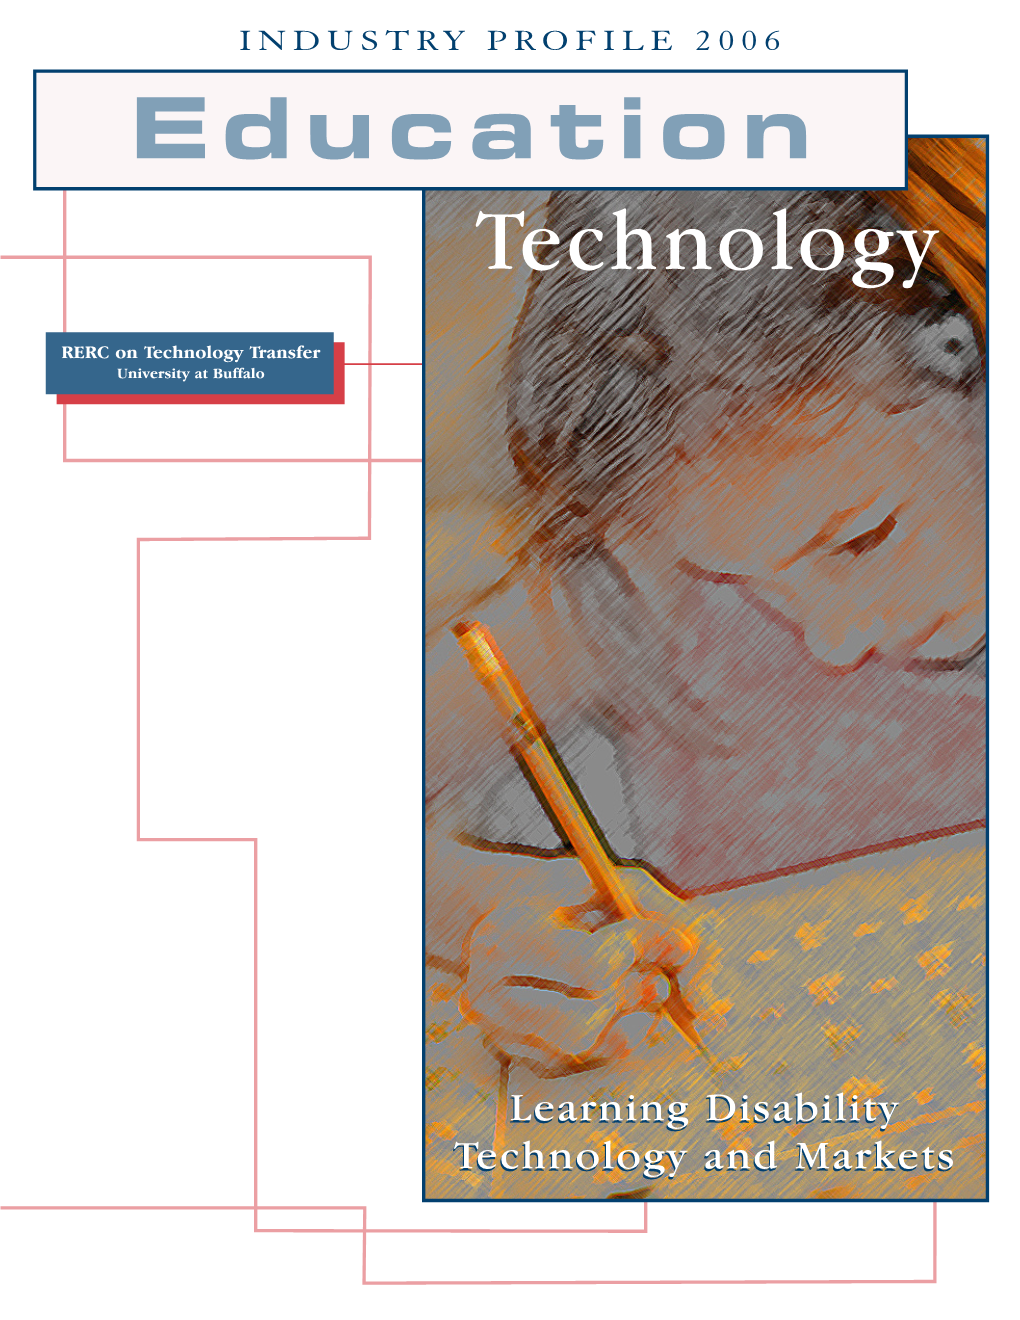 Industry Profile on Education Technology: Learning Disabilities Technologies and Markets